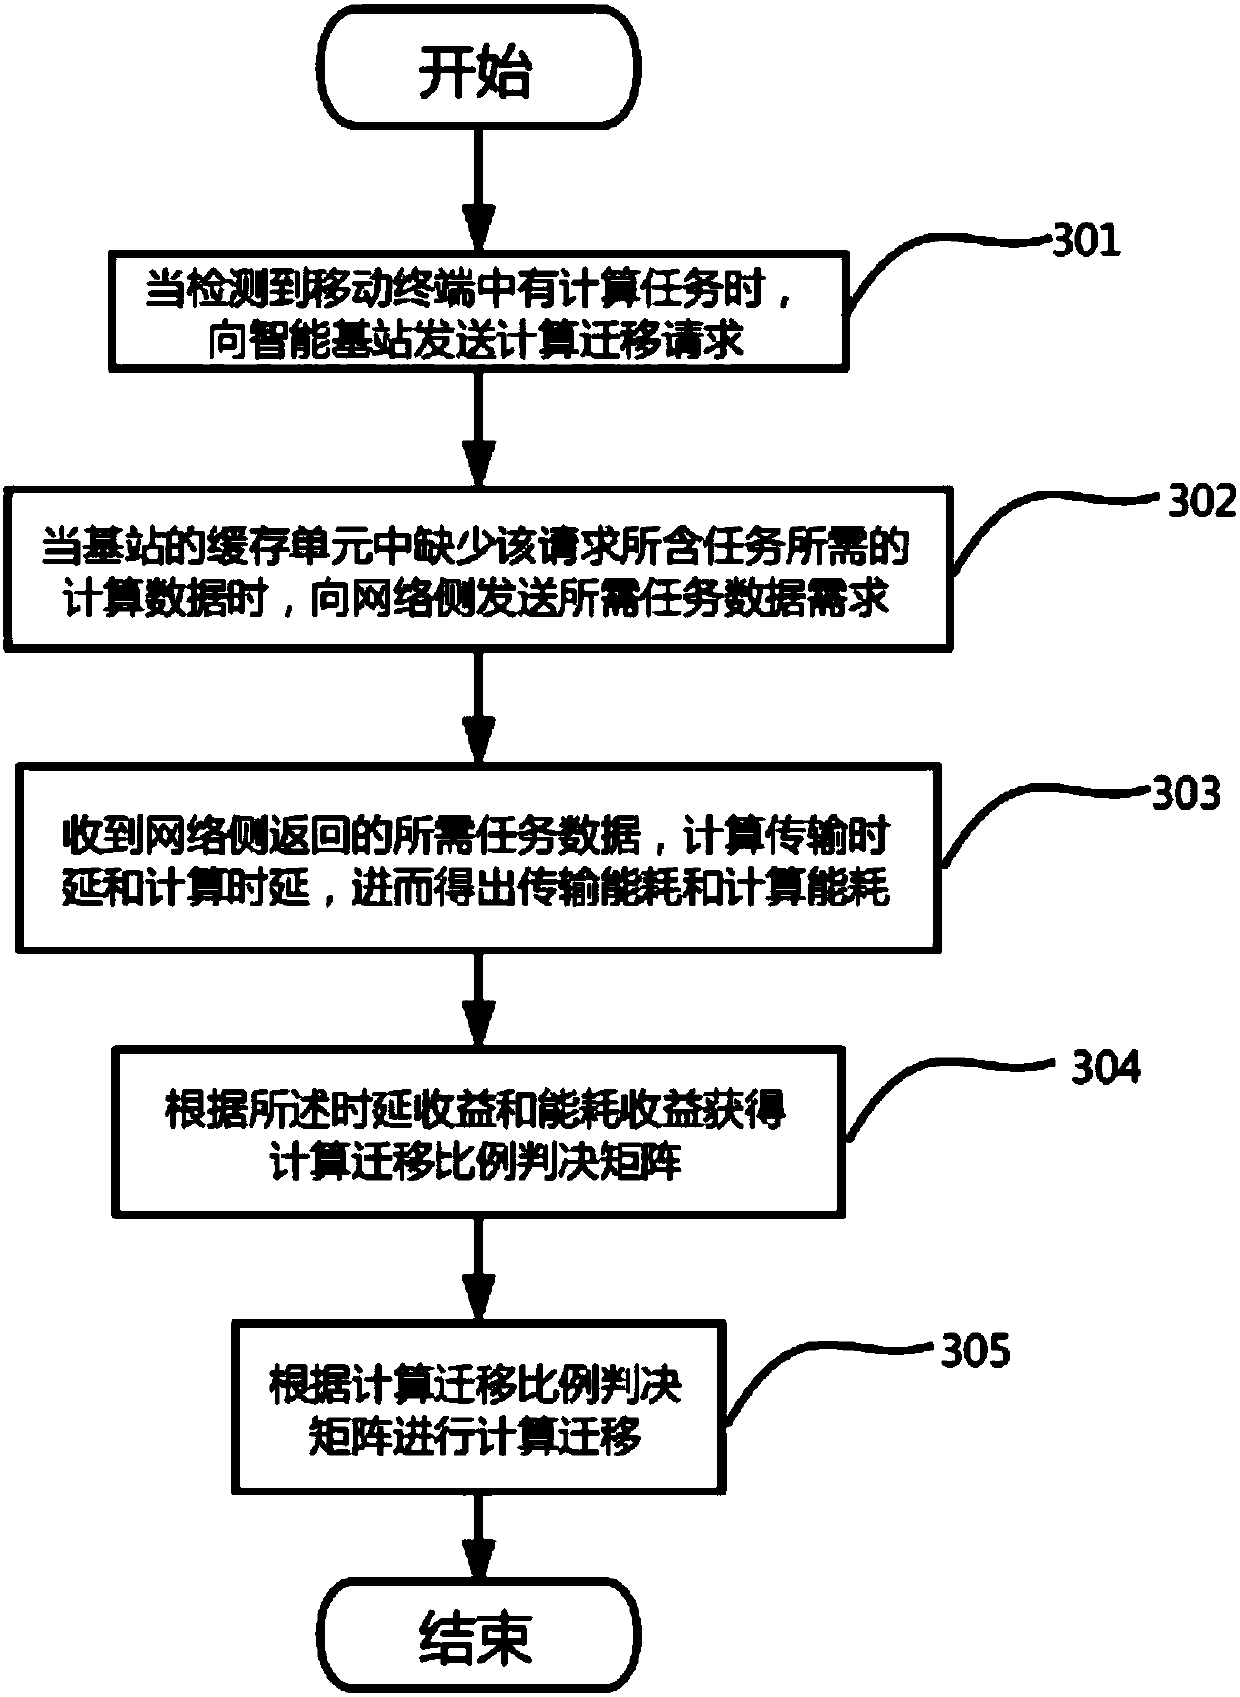 Resource allocation and base station service deployment method based on mobile edge computation